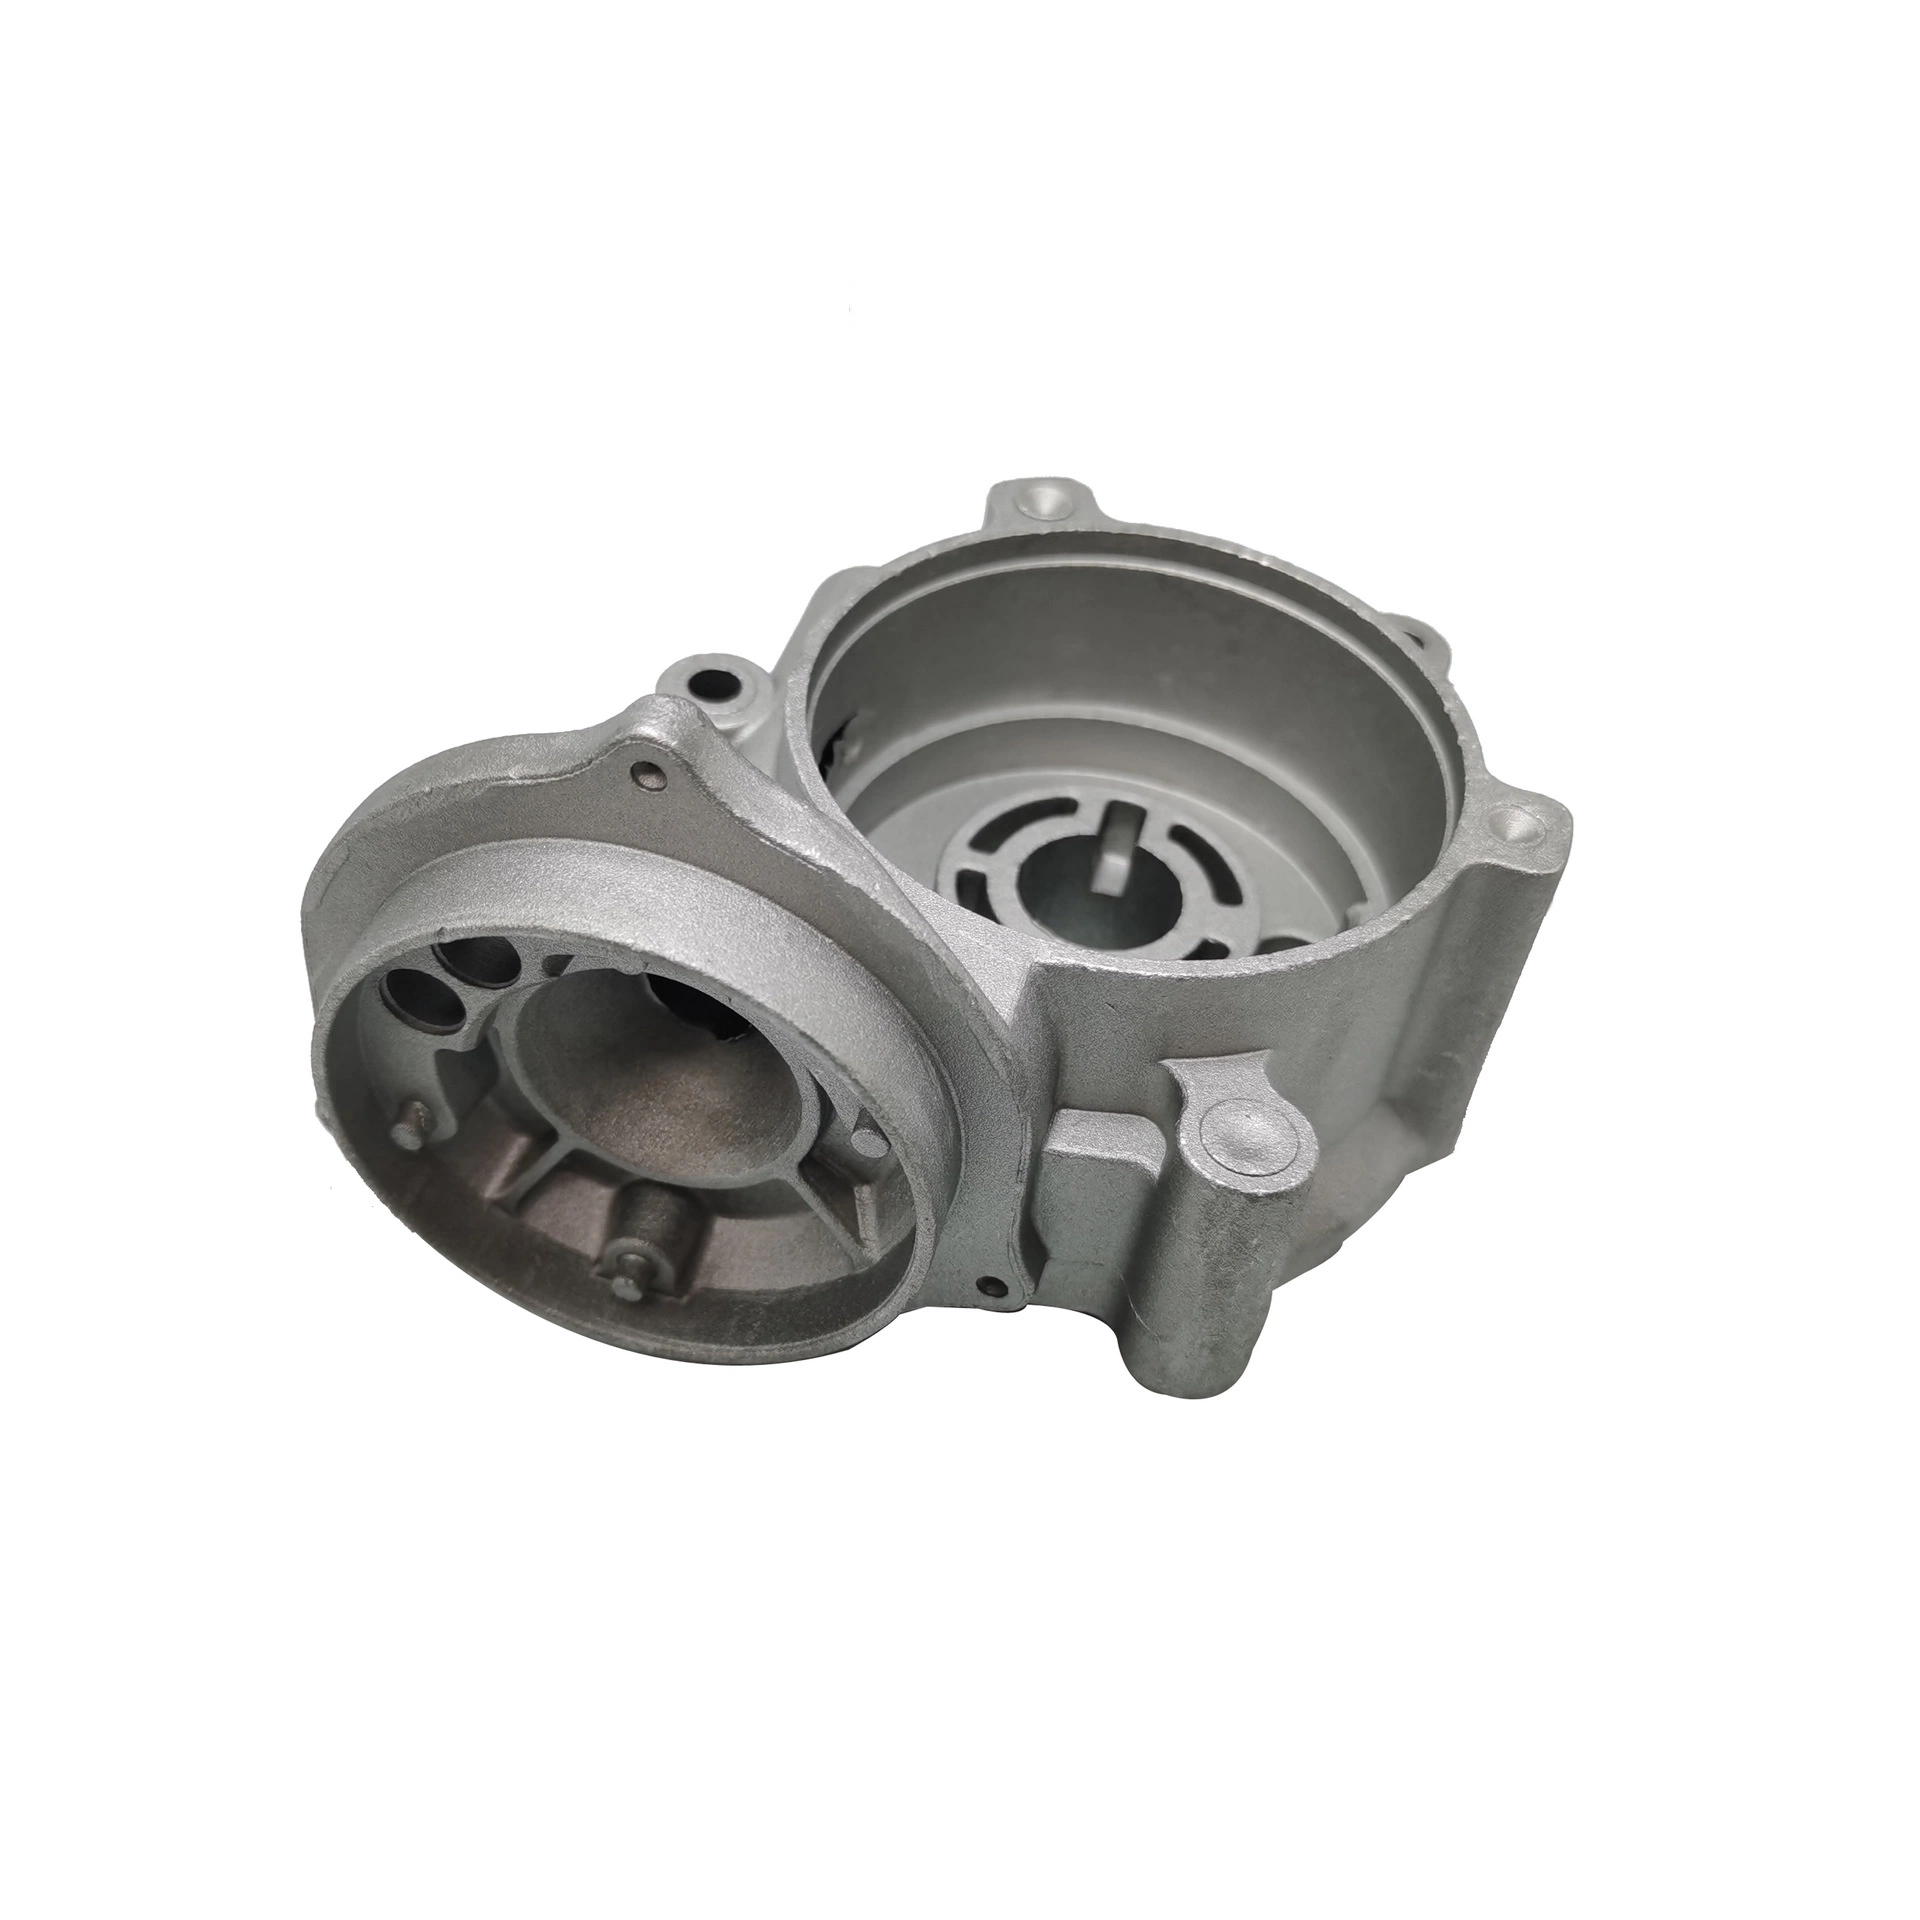 Aluminium Alloy Die Casting Company High Quality Auto Parts/Electronic Accessories /Furniture Accessories Parts